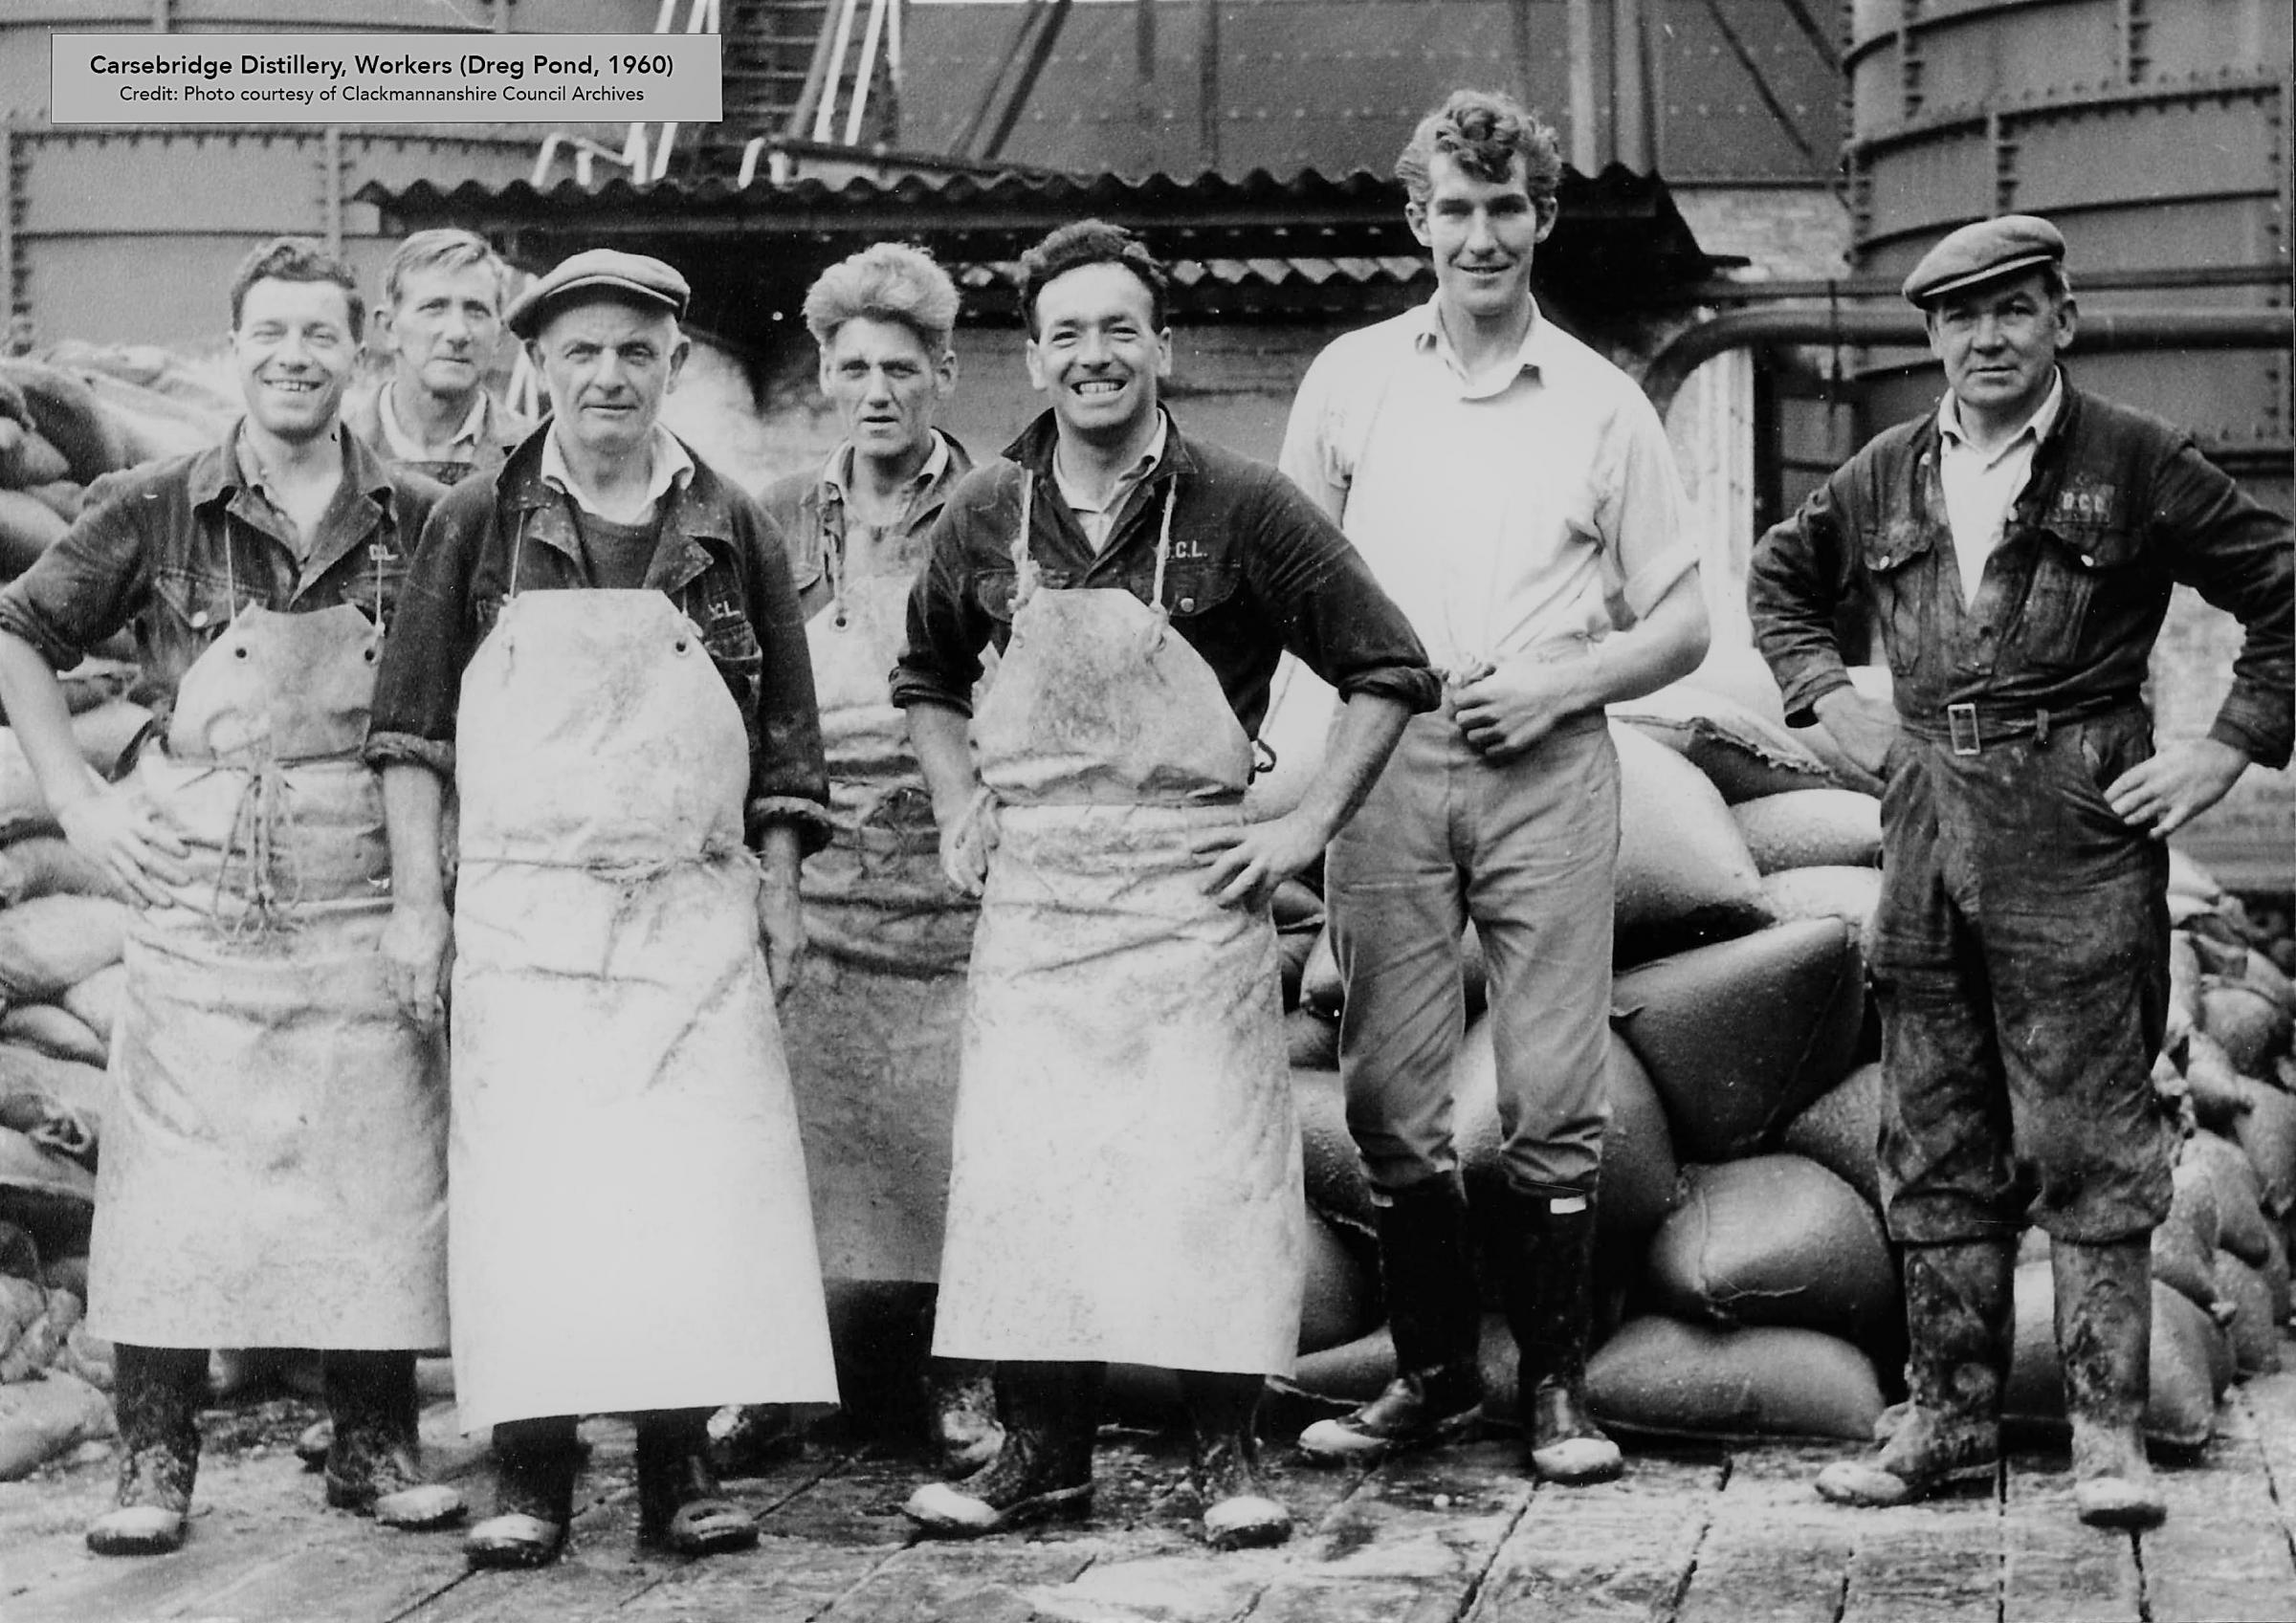 HERITAGE: One focus will be on whisky heritage - pictured are dreg pond workers at Carsebridge in Alloa in the 1960s